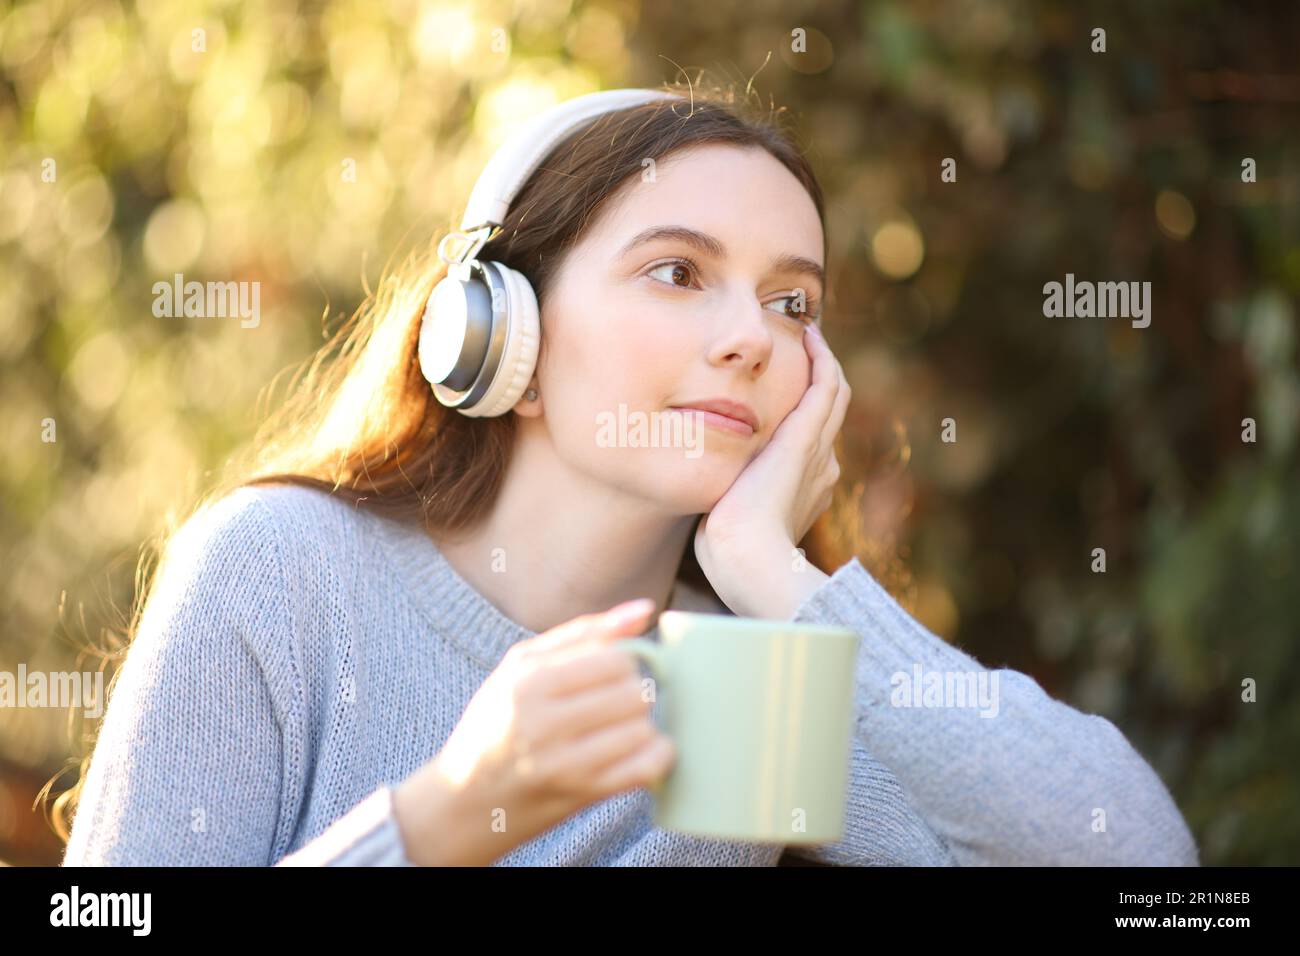 Pensive woman holding coffee and listening to music looking away in a park Stock Photo